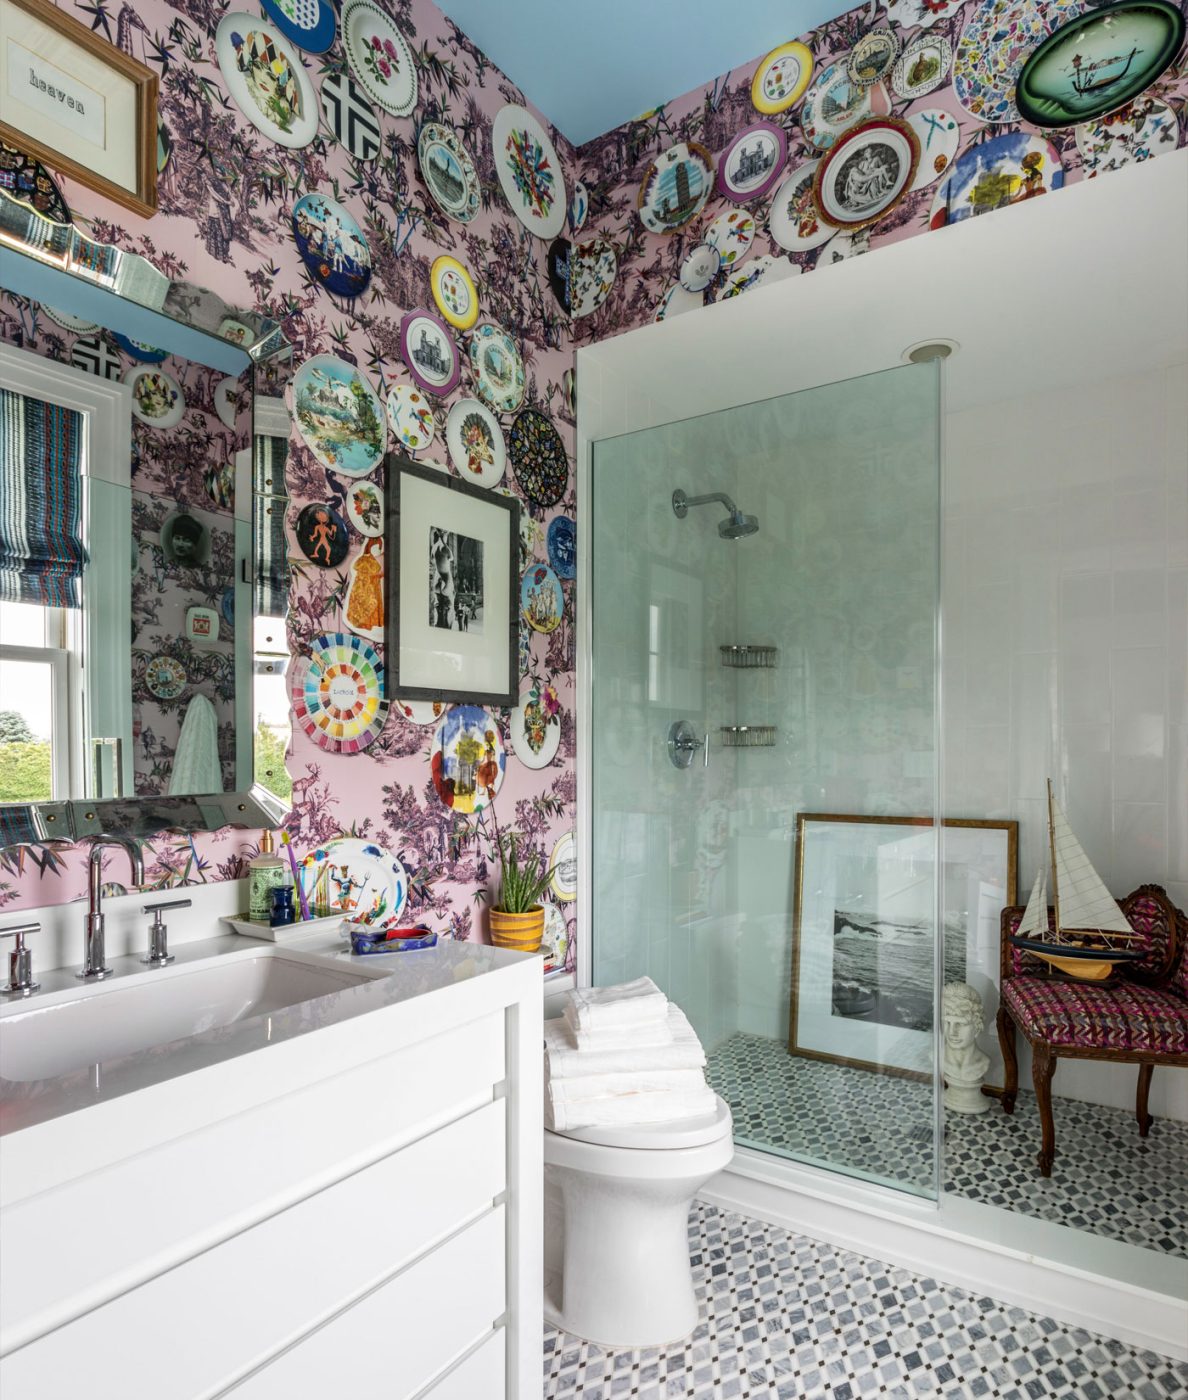 A bathroom in the Hampton Designer Showhouse designed by Rayman Boozer of Apartment 48